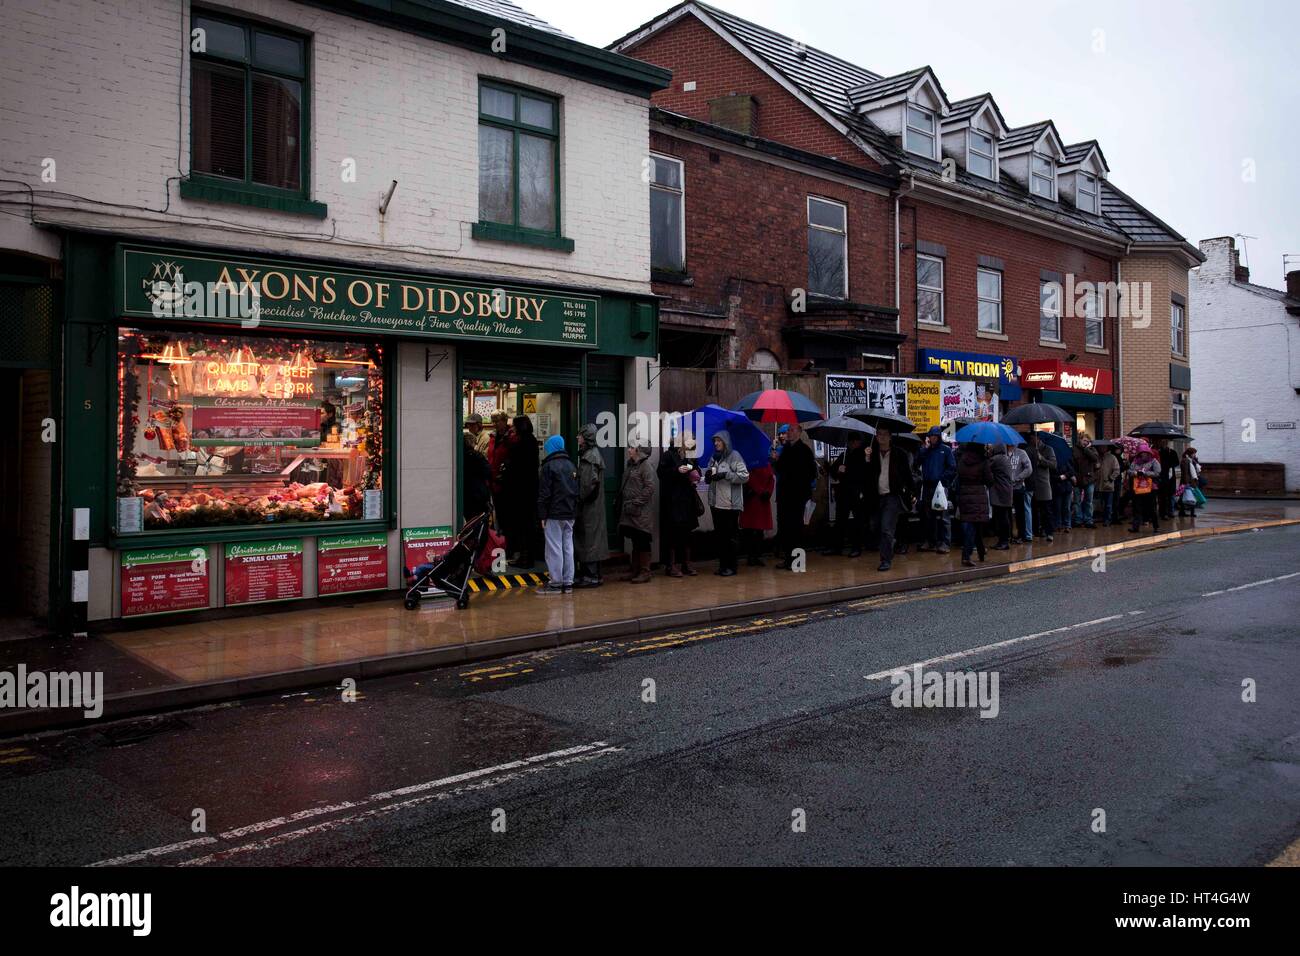 Queues of people outside a butchers shop ahead of Christmas .  Axons of Didsbury butchers Stock Photo